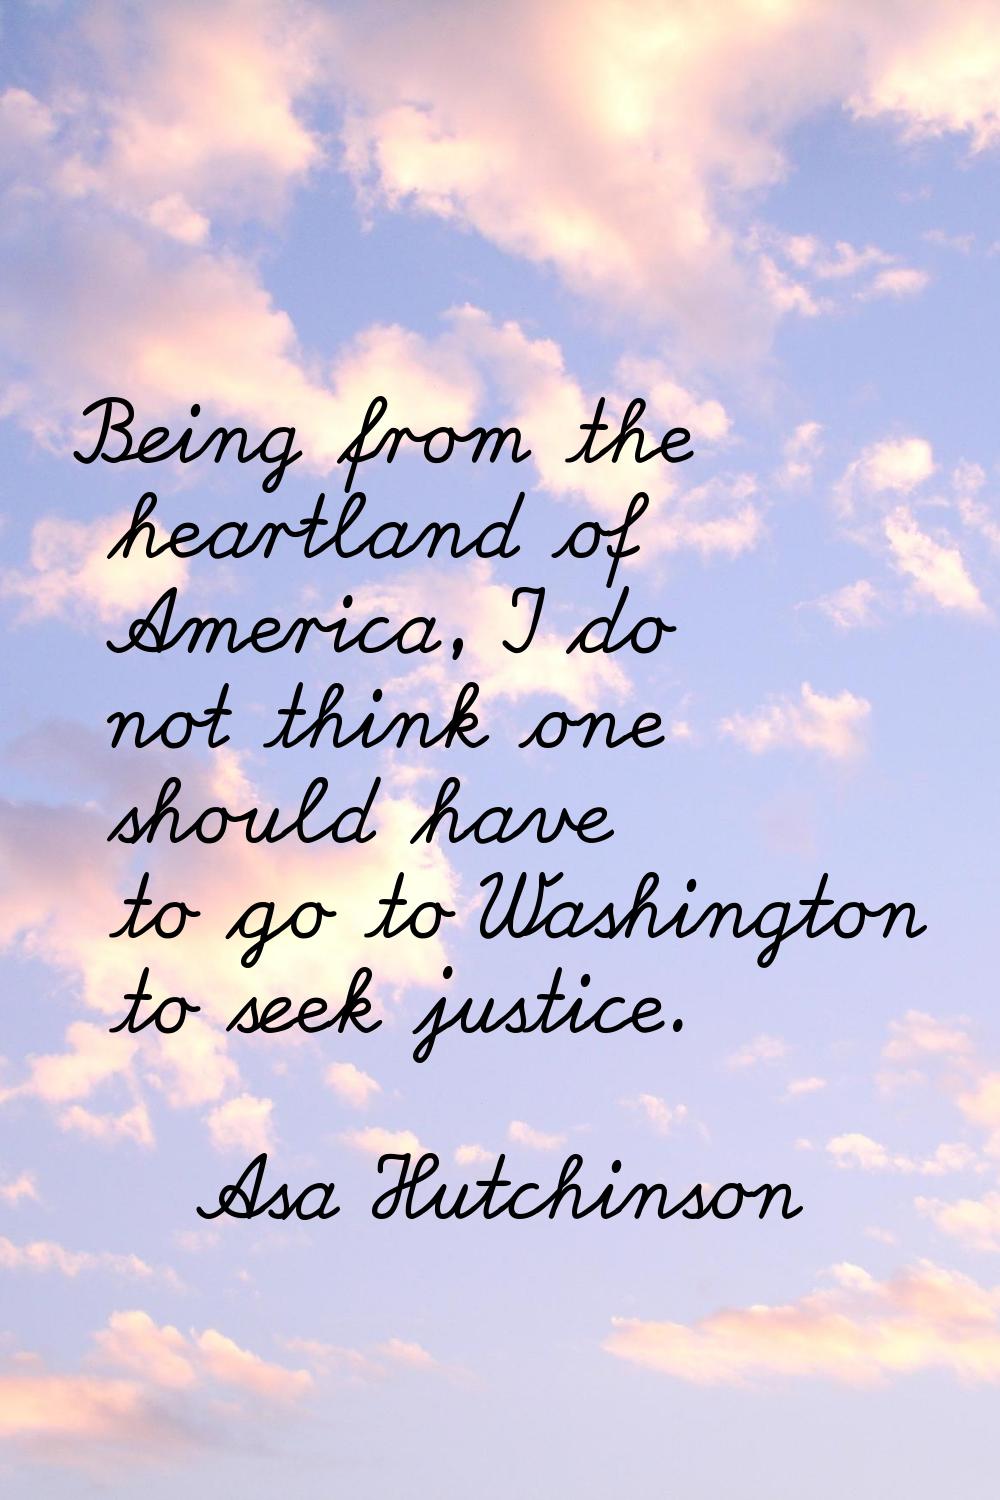 Being from the heartland of America, I do not think one should have to go to Washington to seek jus